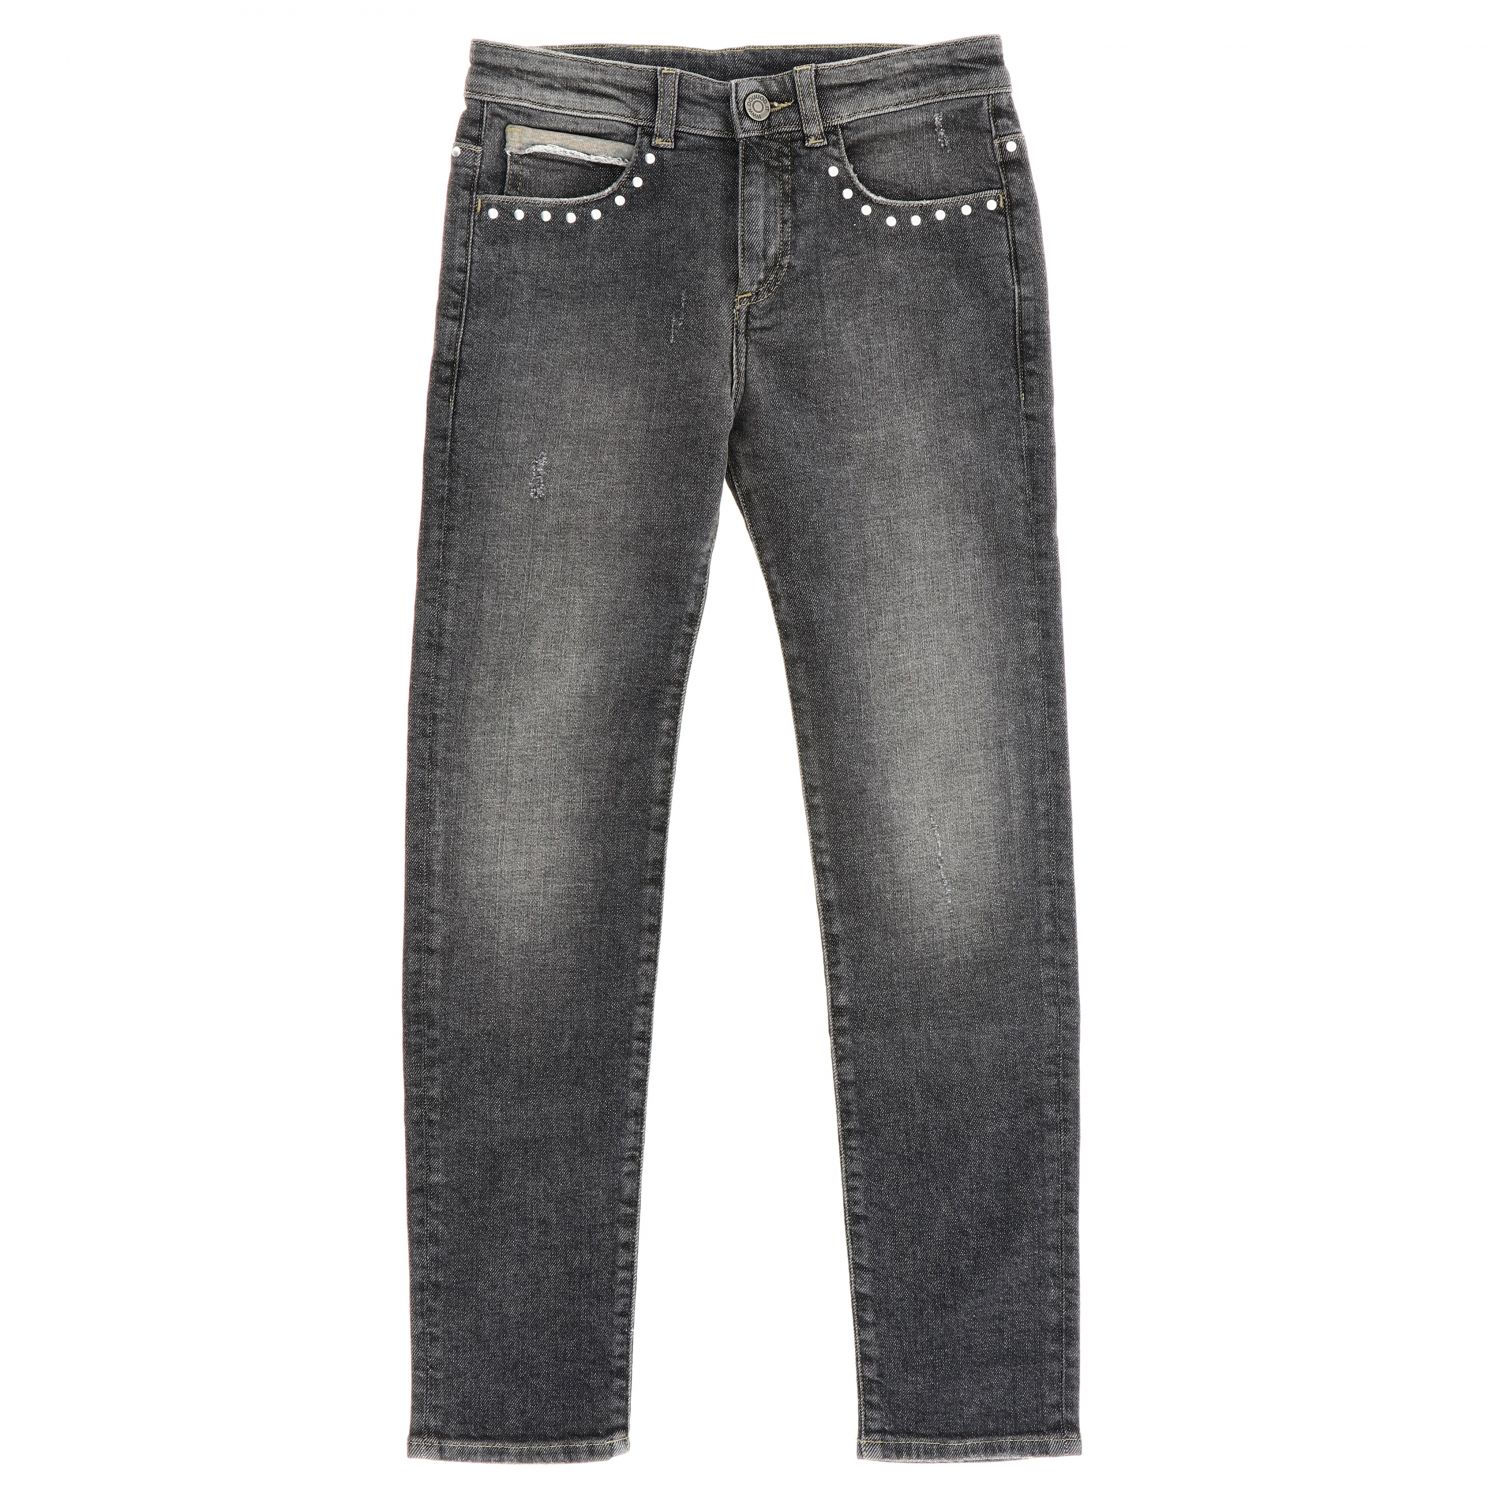 Douuod Outlet: Jeans kids - Grey | Jeans Douuod PJ011010 GIGLIO.COM